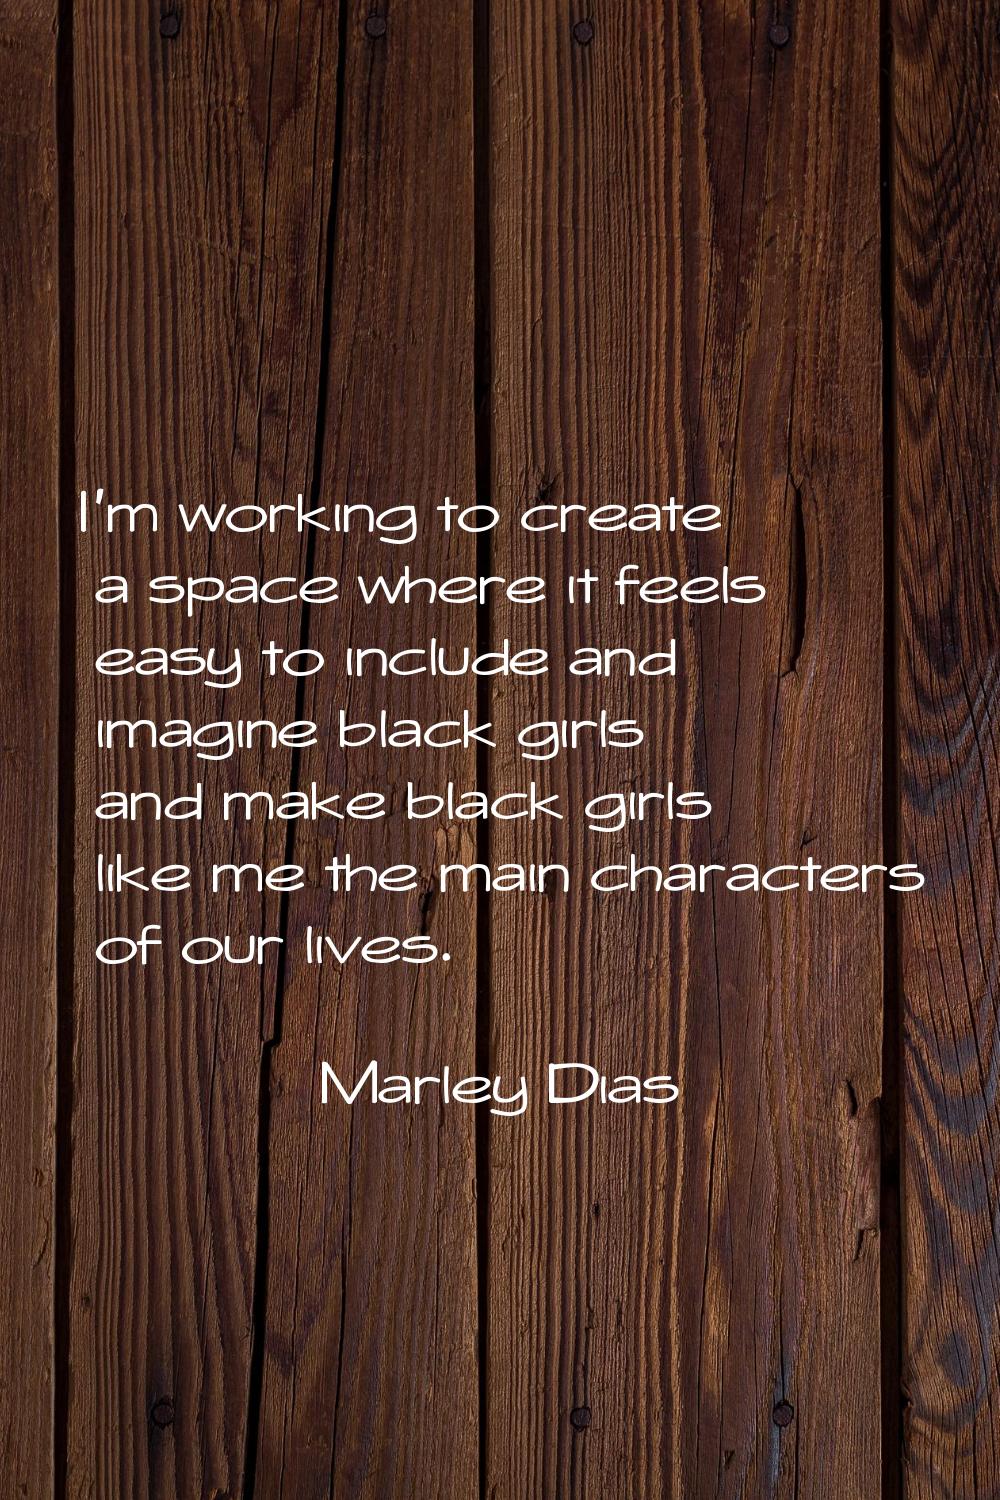 I'm working to create a space where it feels easy to include and imagine black girls and make black